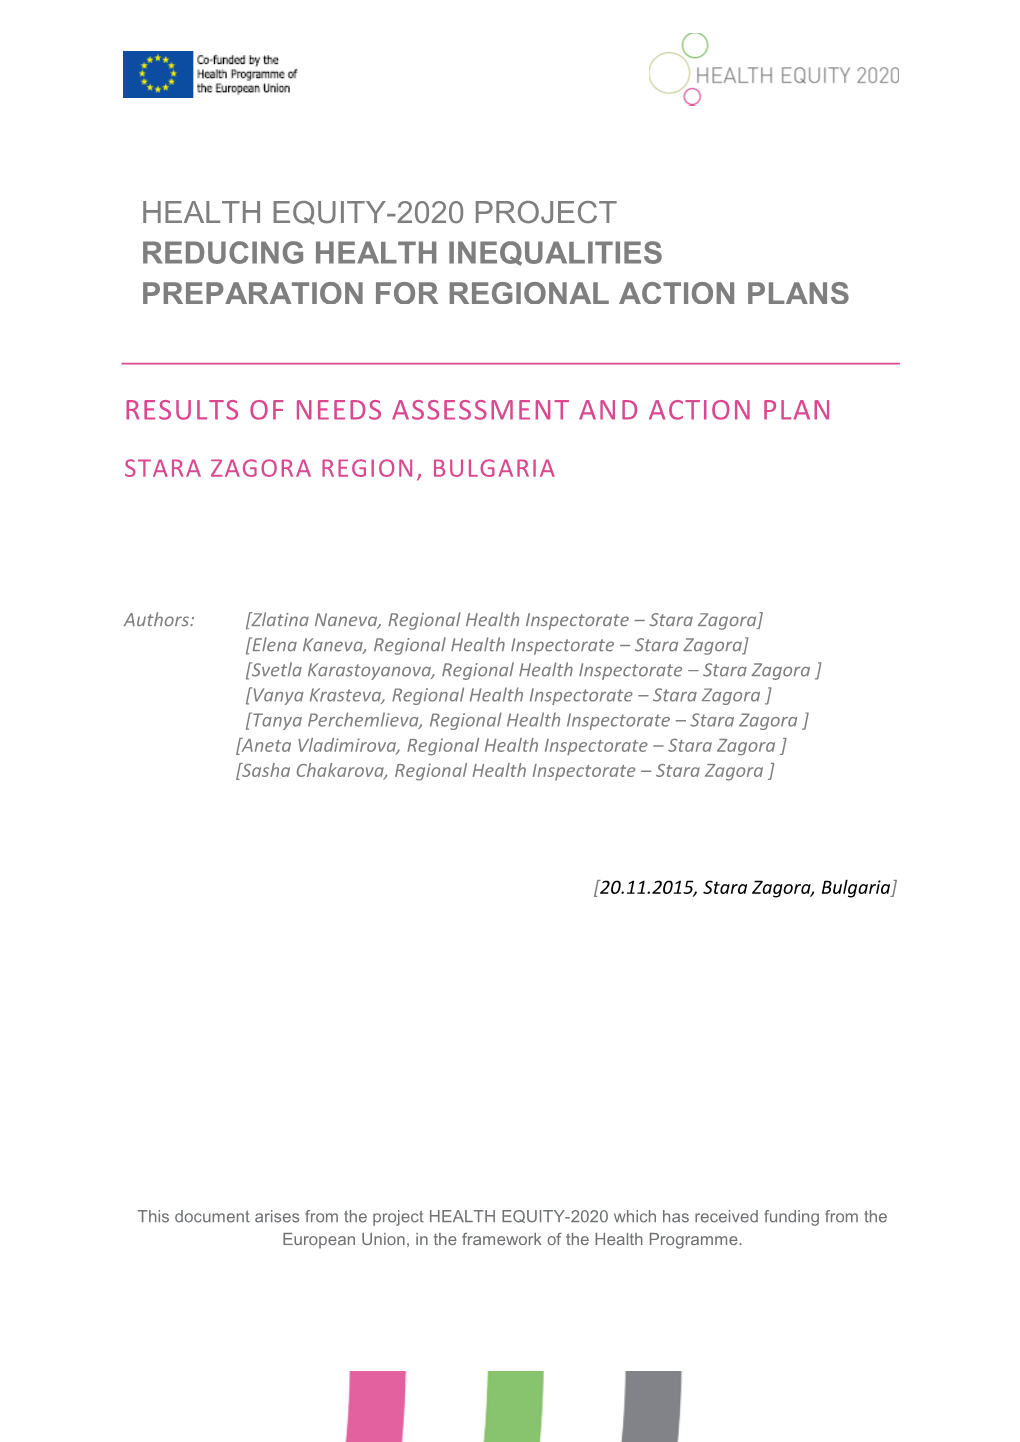 Results of Needs Assessment and Action Plan – Stara Zagora